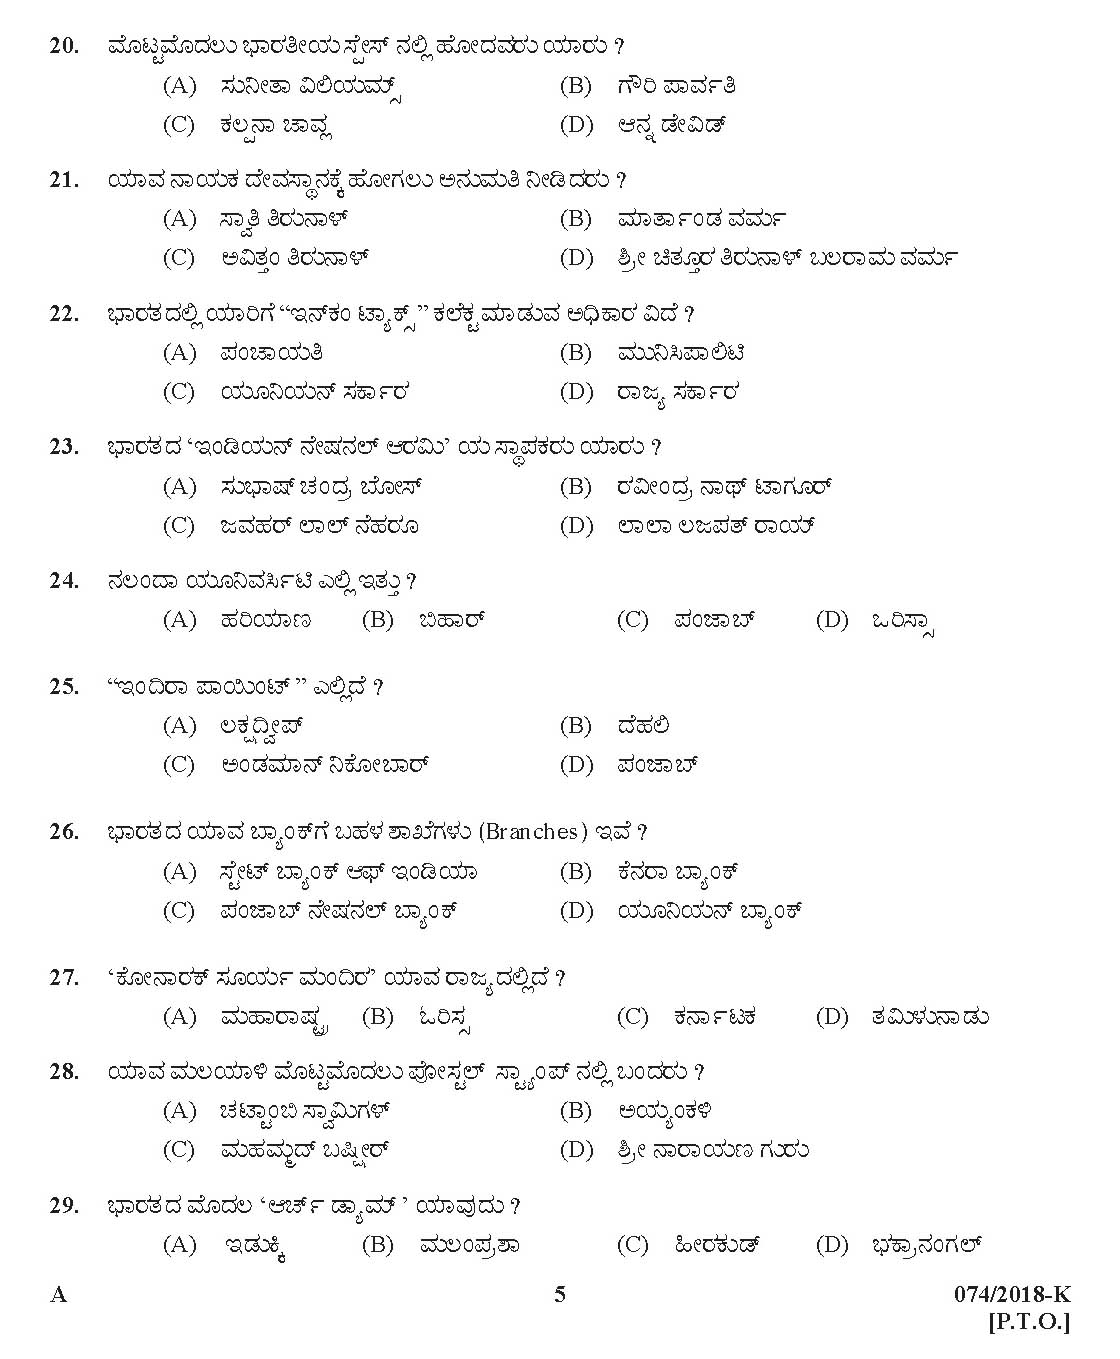 Kerala PSC Police Constable Driver Exam Question Paper Code 0742018 K 4